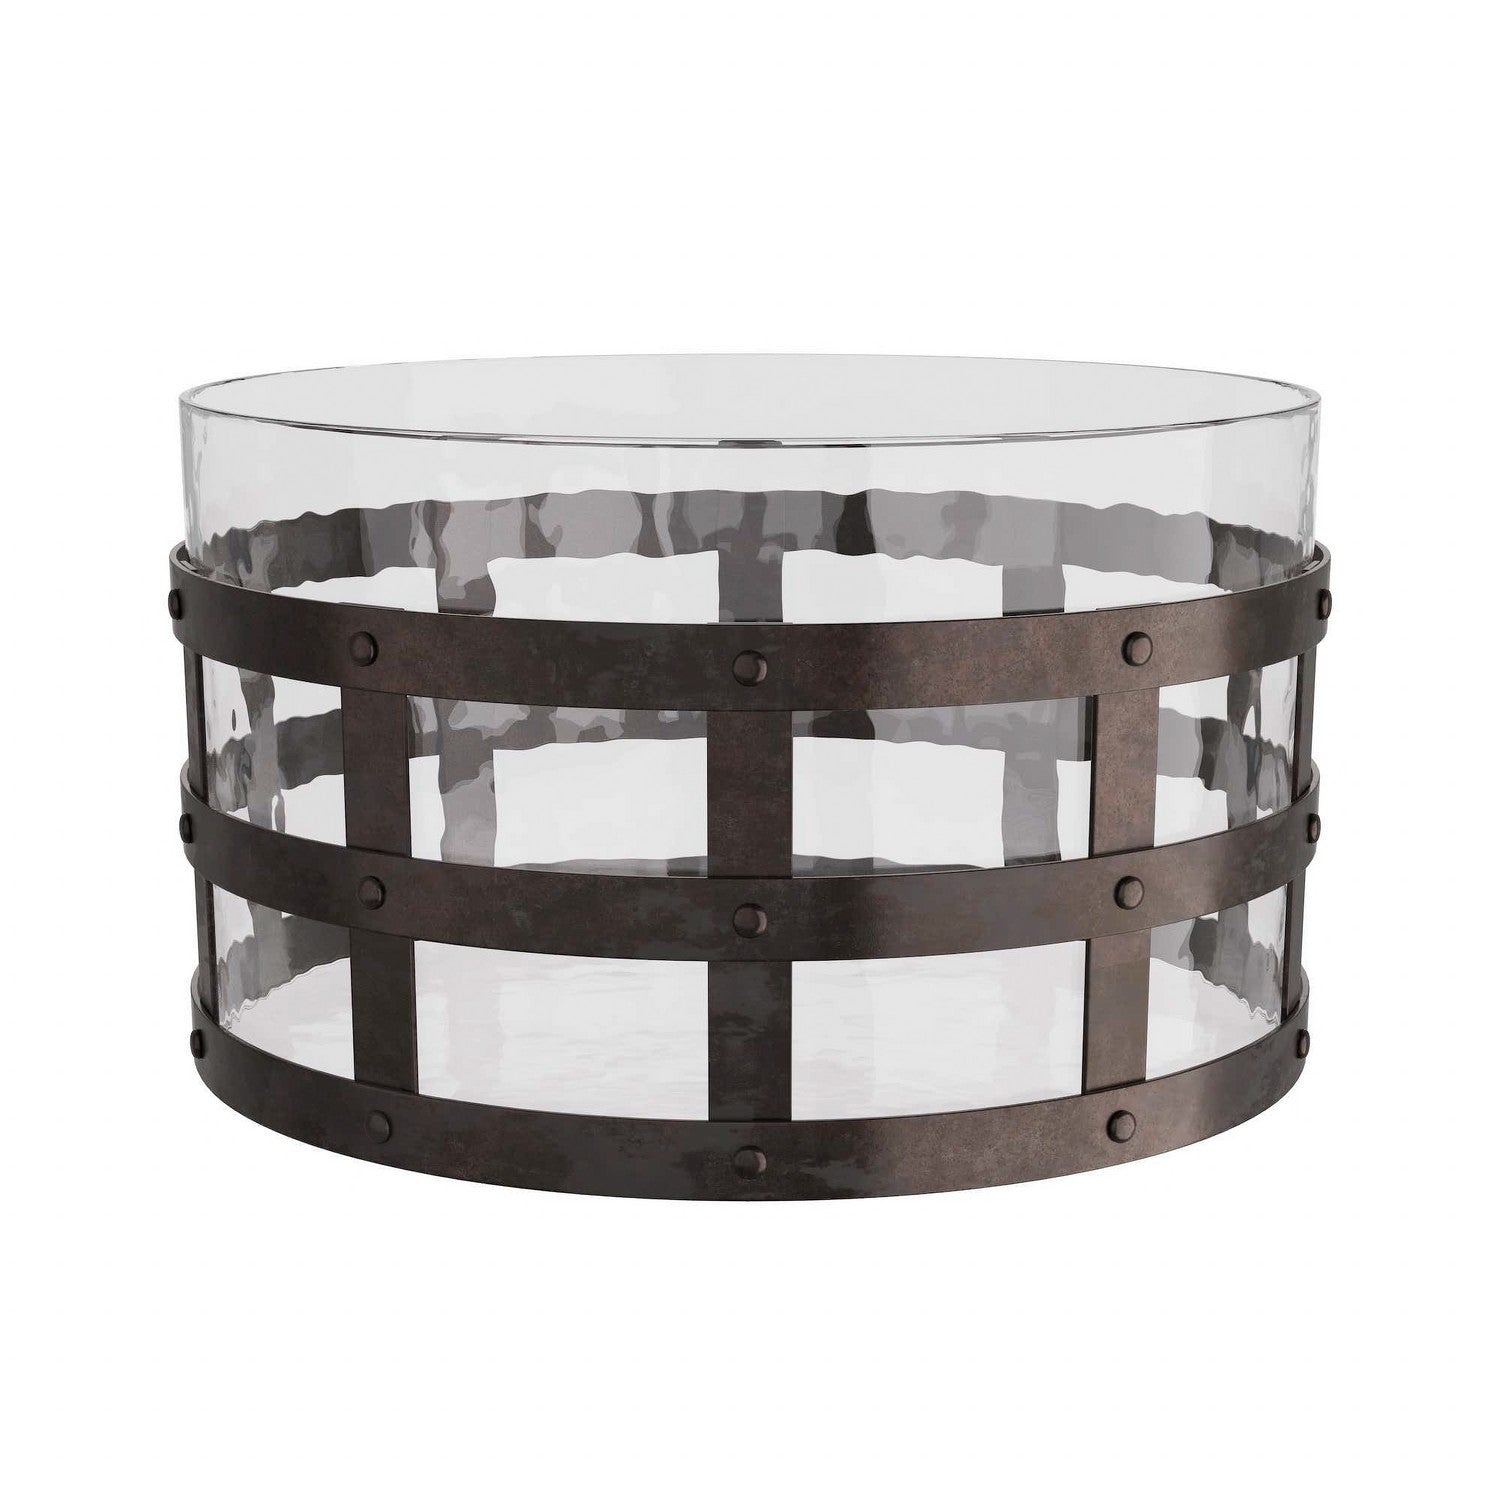 Centerpiece from the Rivet collection in Blackened Iron finish